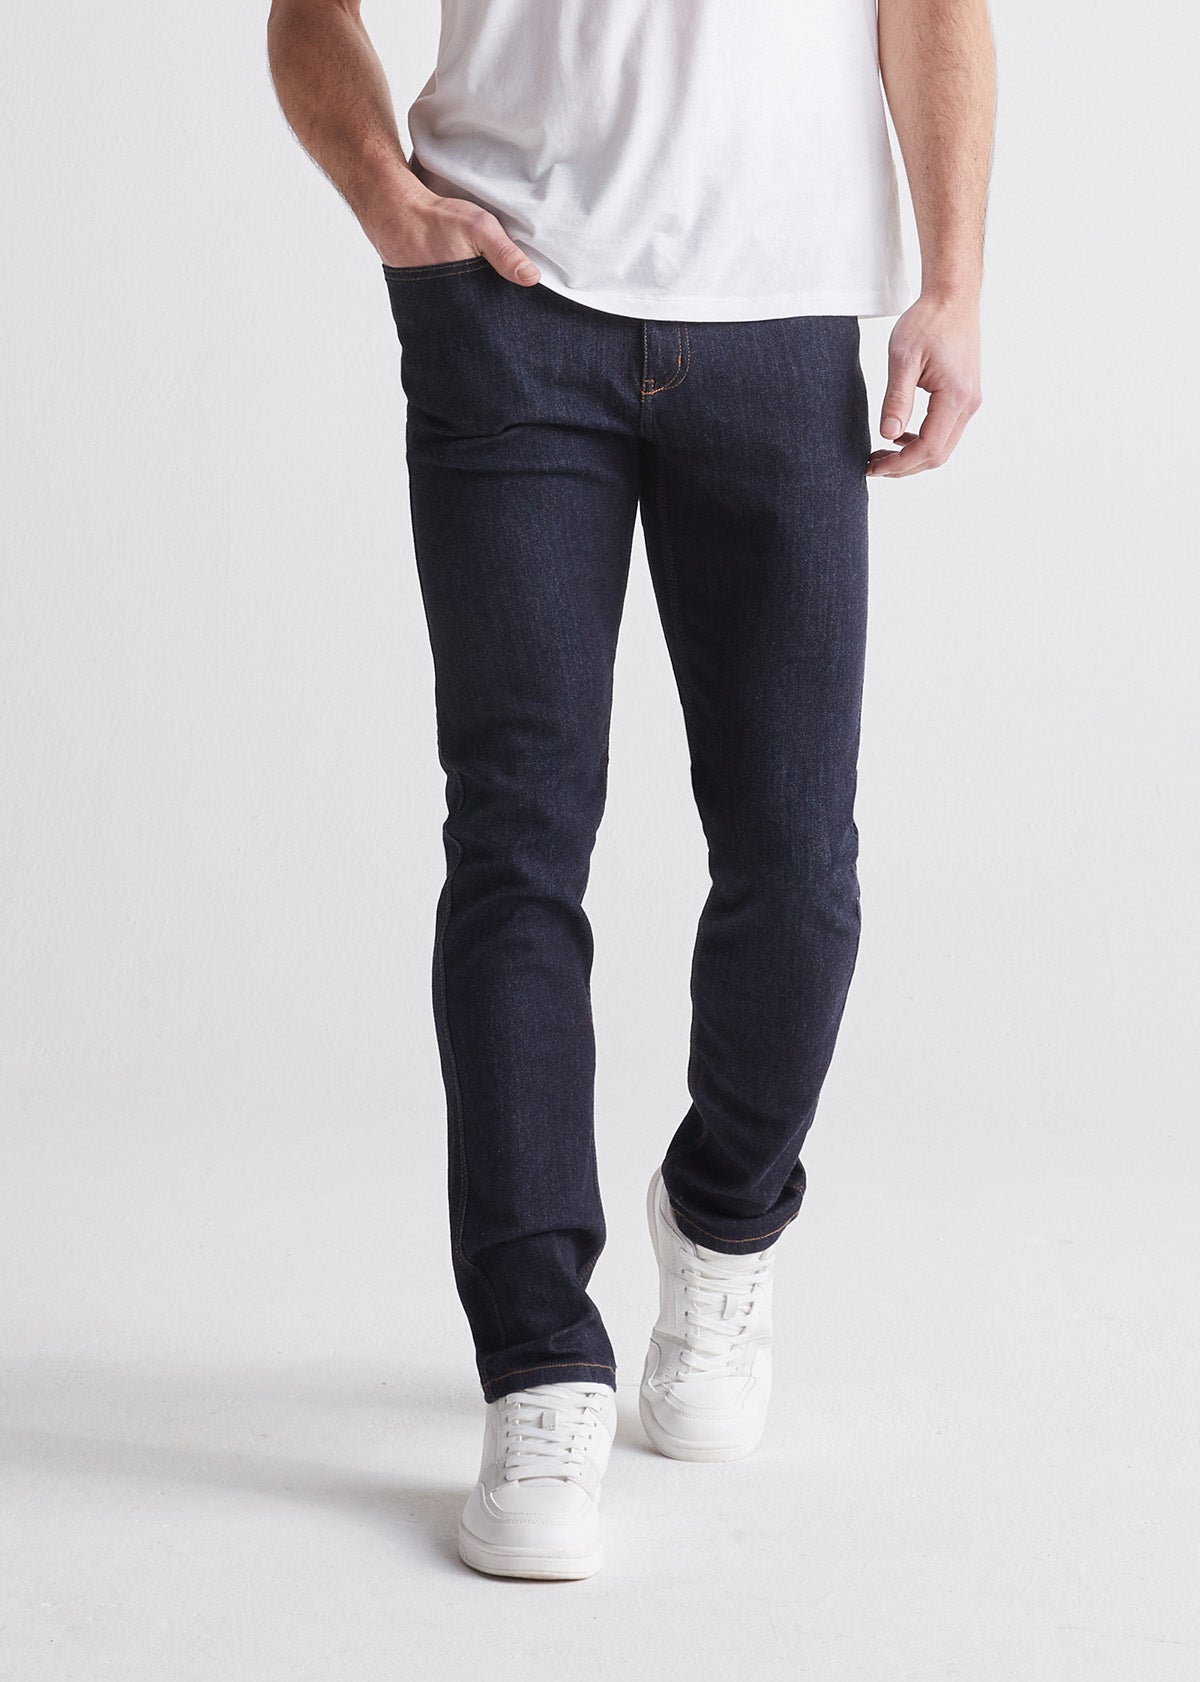 Cottonking S30356 Mens Jeans in Pune at best price by Cotton King - Justdial